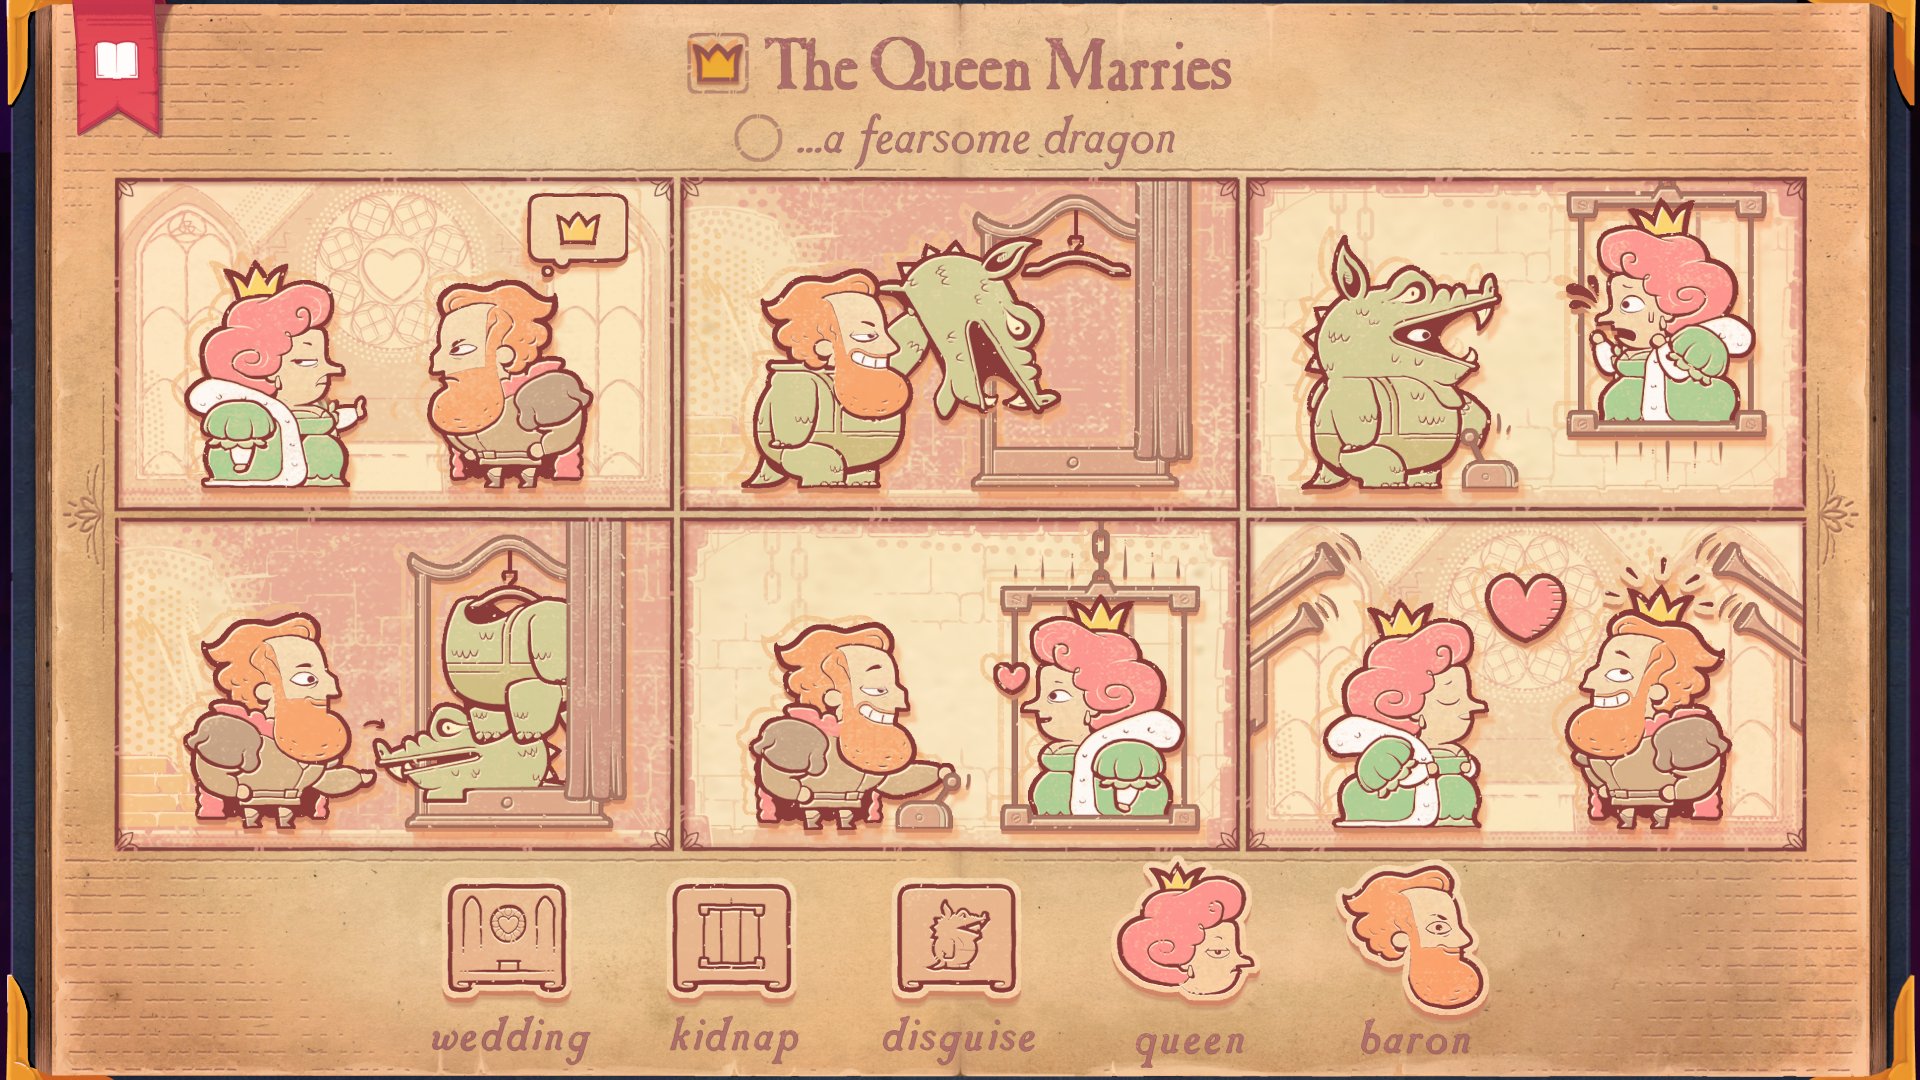 A Srtoryteller puzzle shows a Queen marrying a Baron.